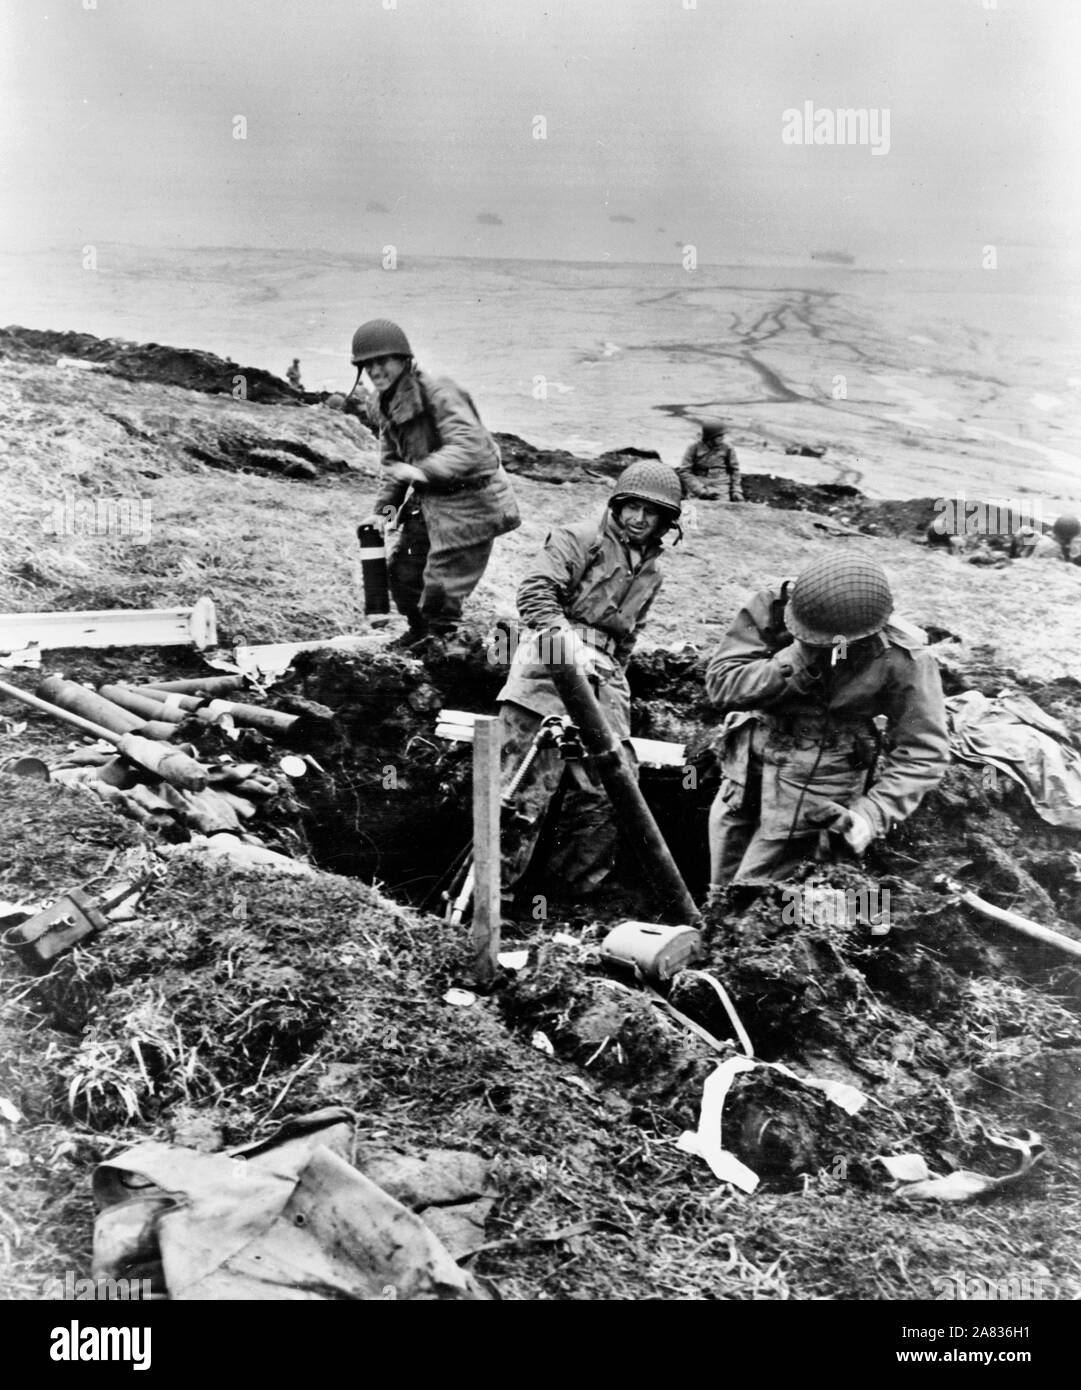 Attu, Aleutian Islands. Soldiers hurling their trench mortar shells over a ridge into a Japanese position. June 4, 1943 Stock Photo